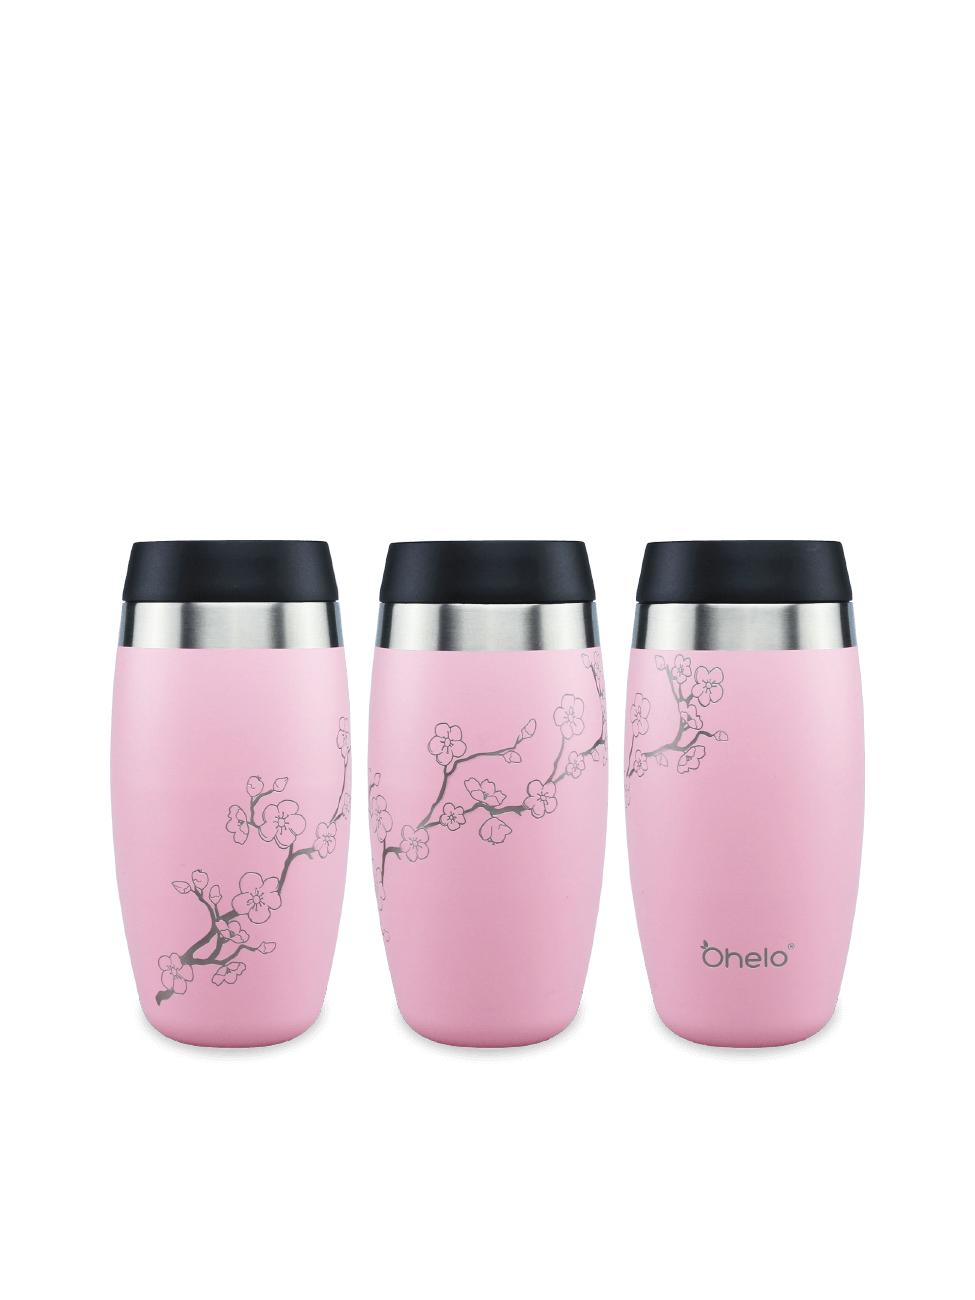 Ohelo stainless steel reusable coffee cup in pink with laser etched cherry blossom - images from 3 sides to show full design